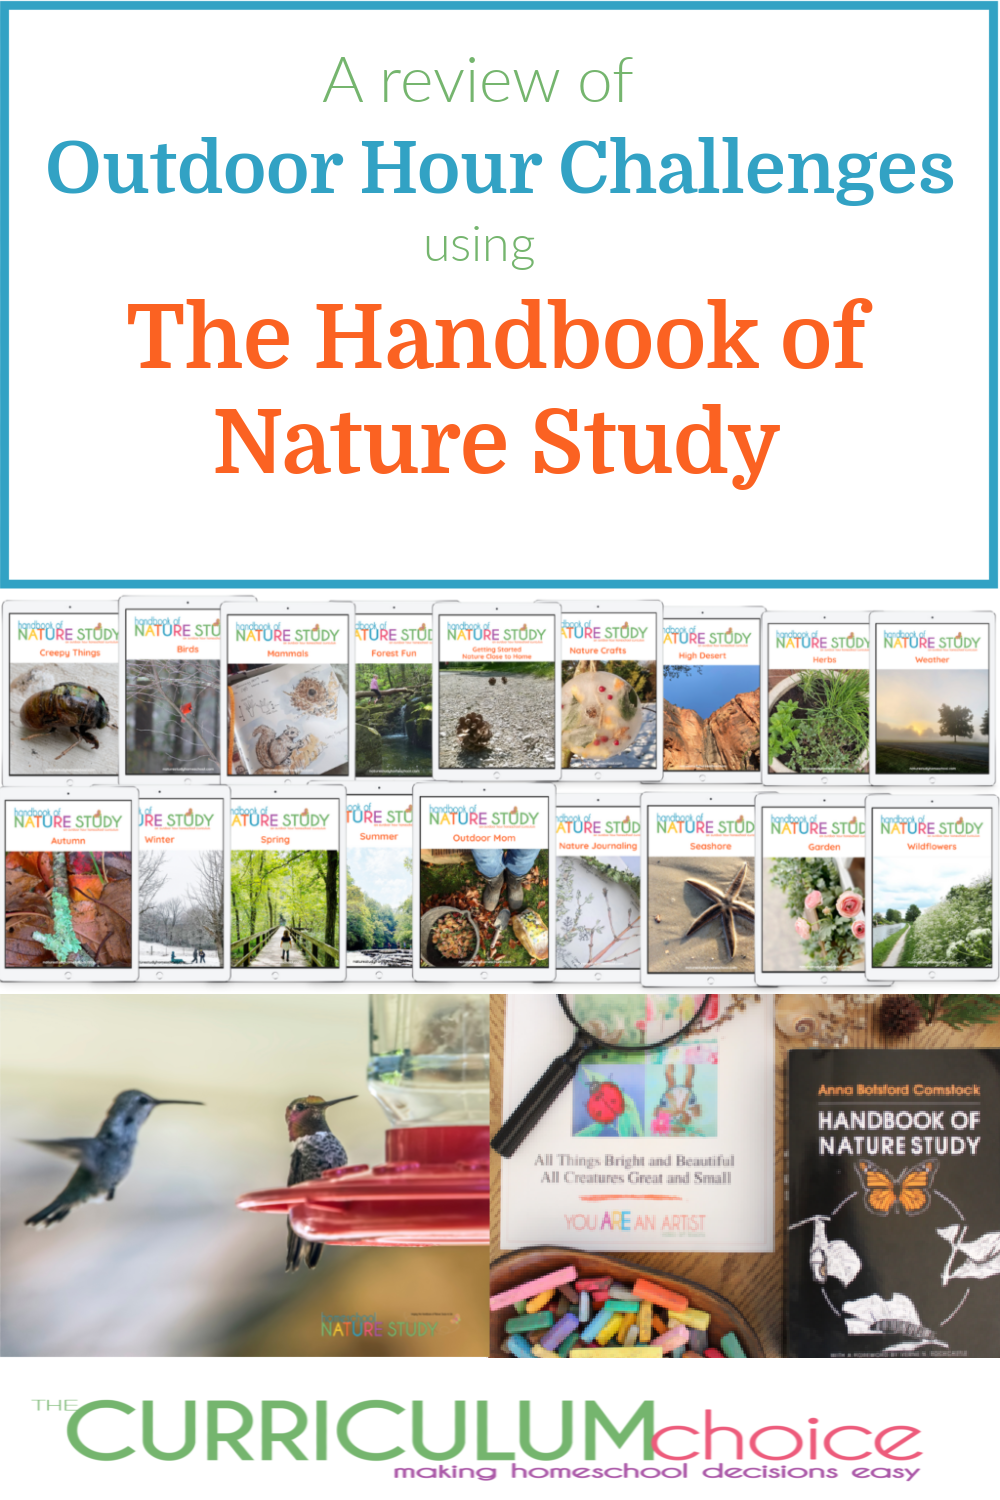 Outdoor Hour Challenges using The Handbook of Nature Study are a great way to get you up and out, exploring the natural world around you. A review from The Curriculum Choice